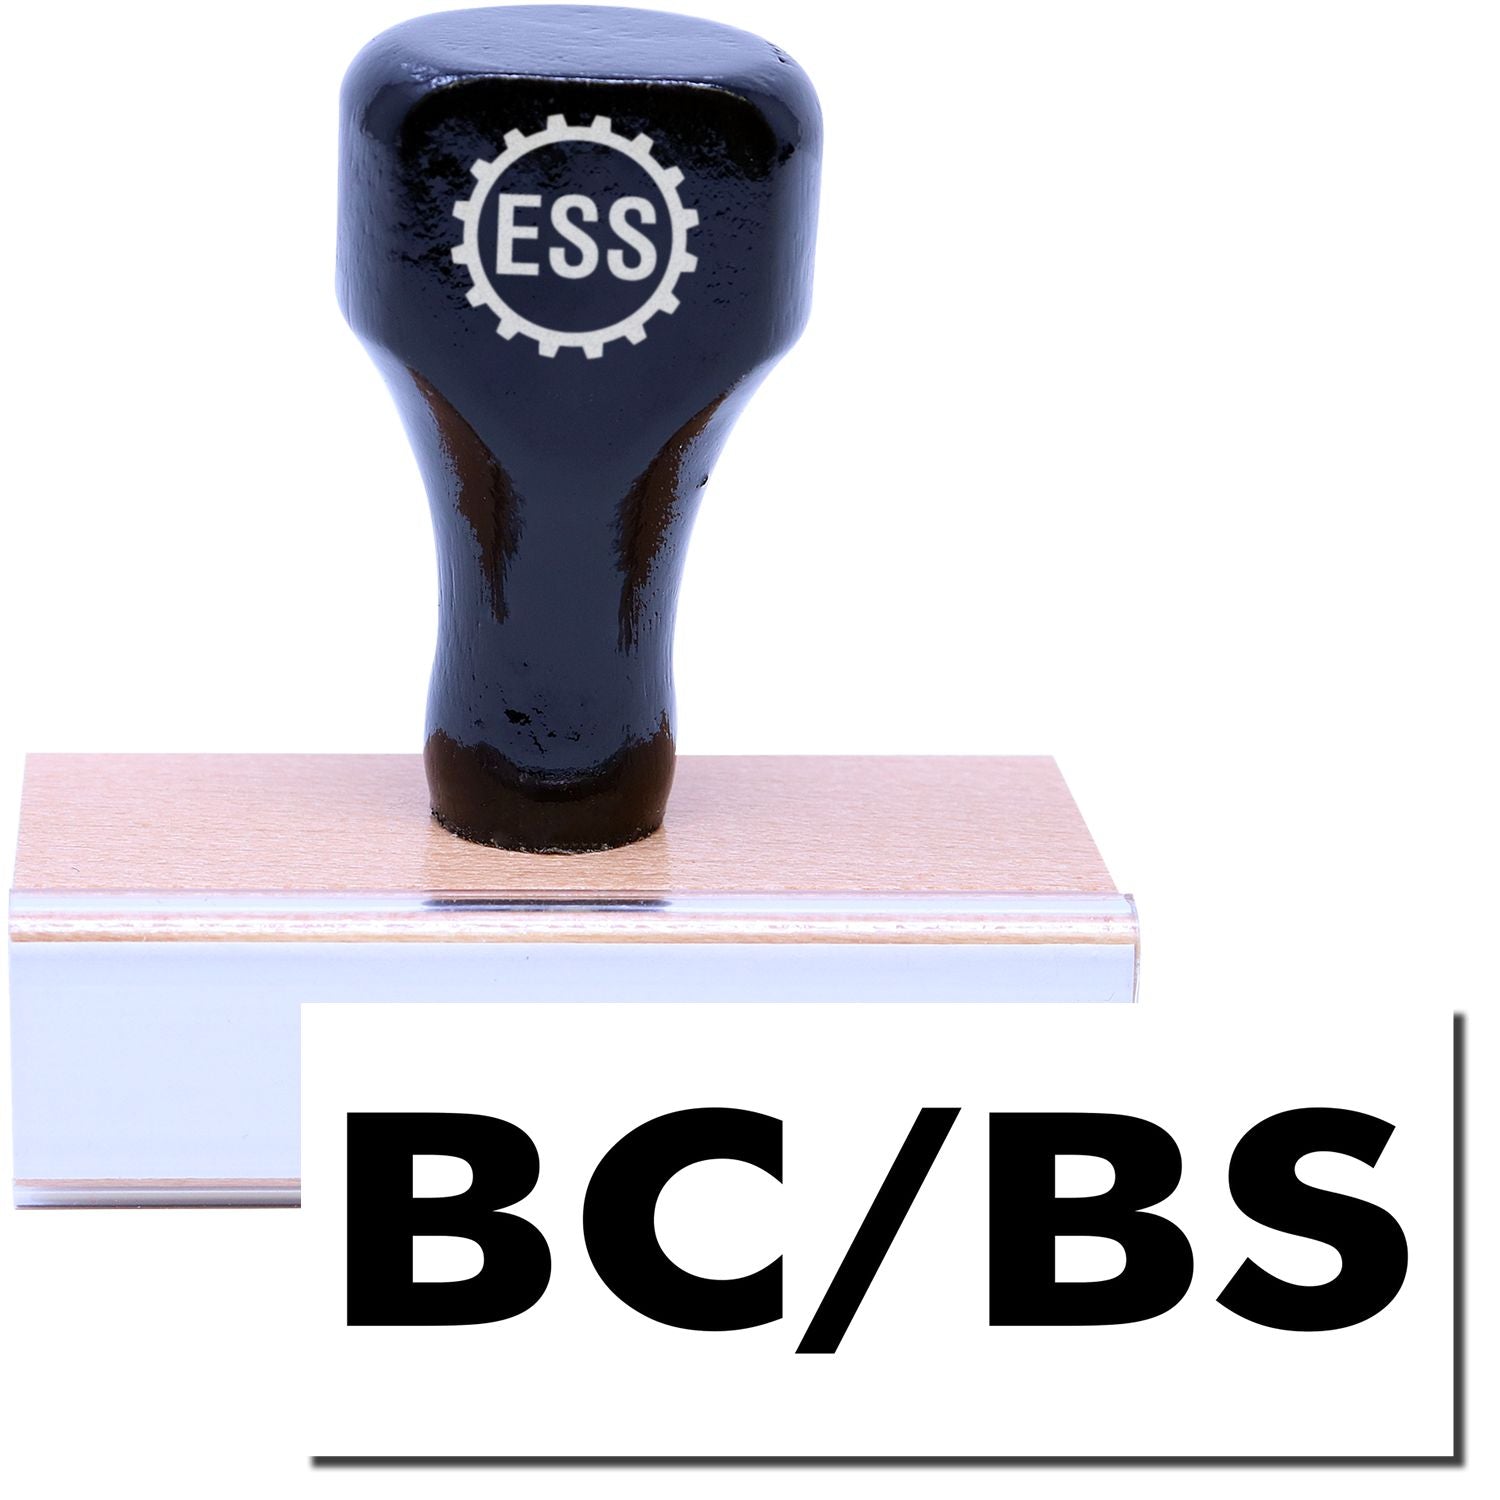 A stock office medical rubber stamp with a stamped image showing how the text "BC/BS" is displayed after stamping.